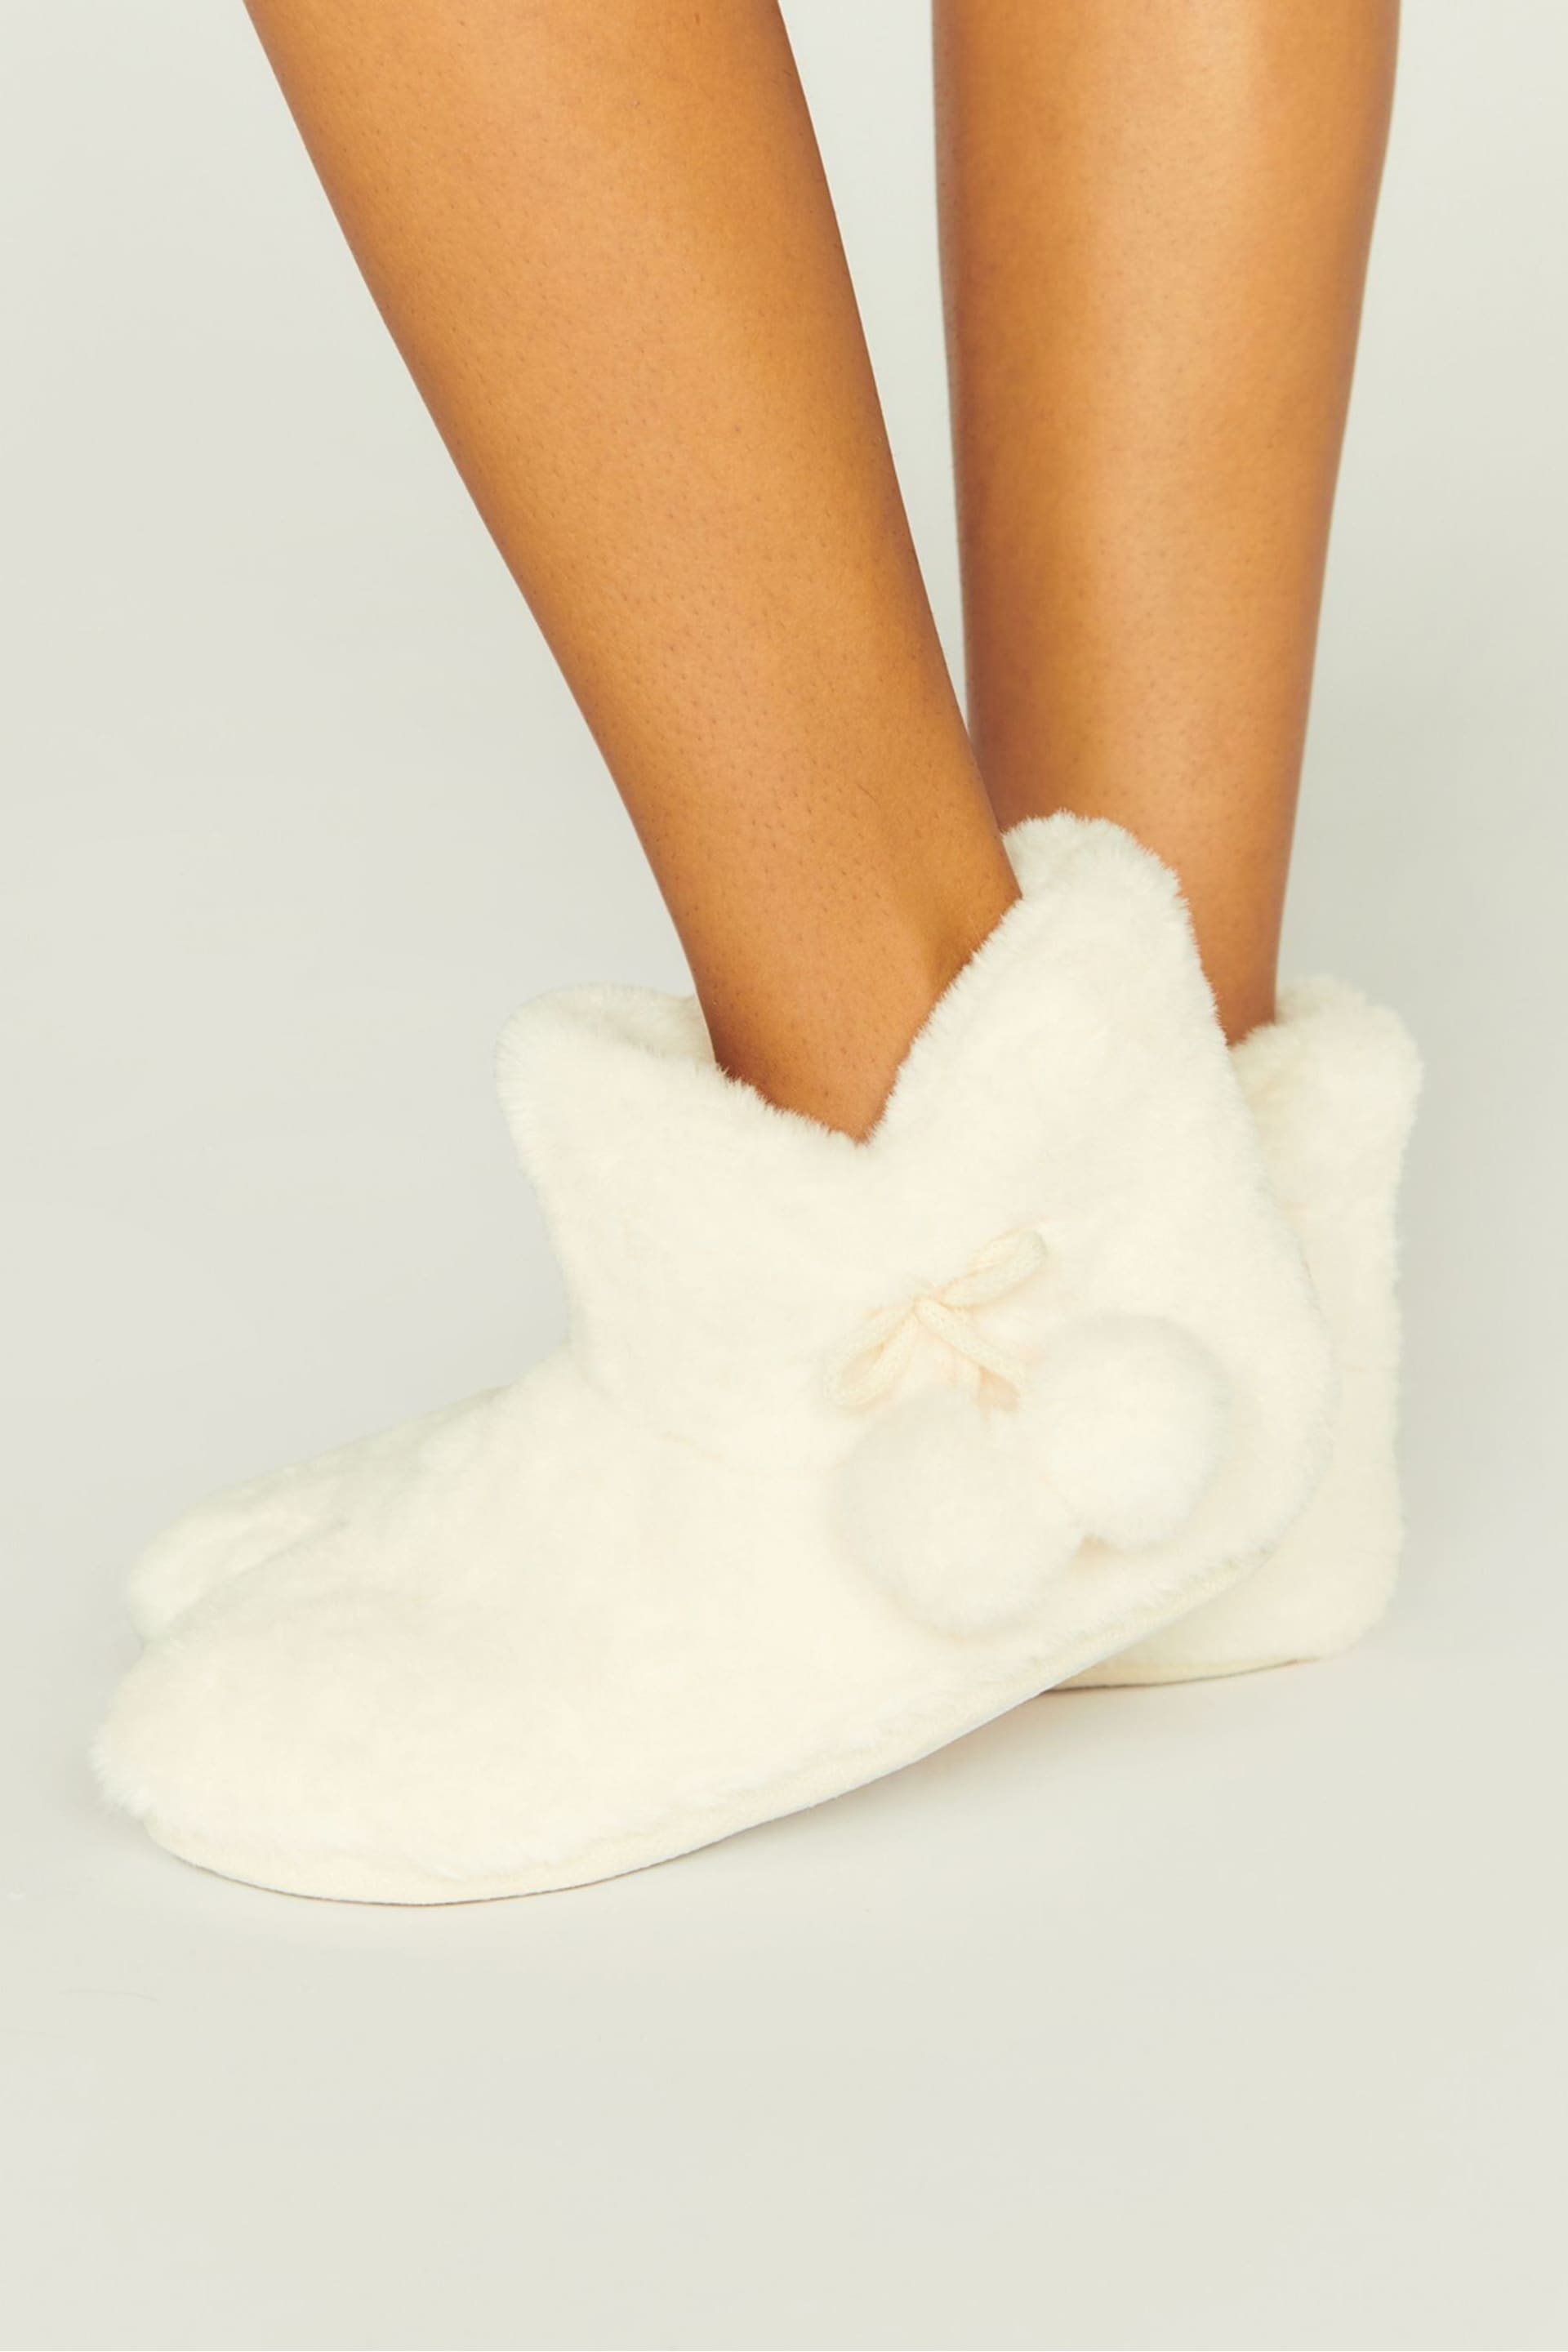 Boux Avenue Plush Slippers Boots - Image 1 of 2